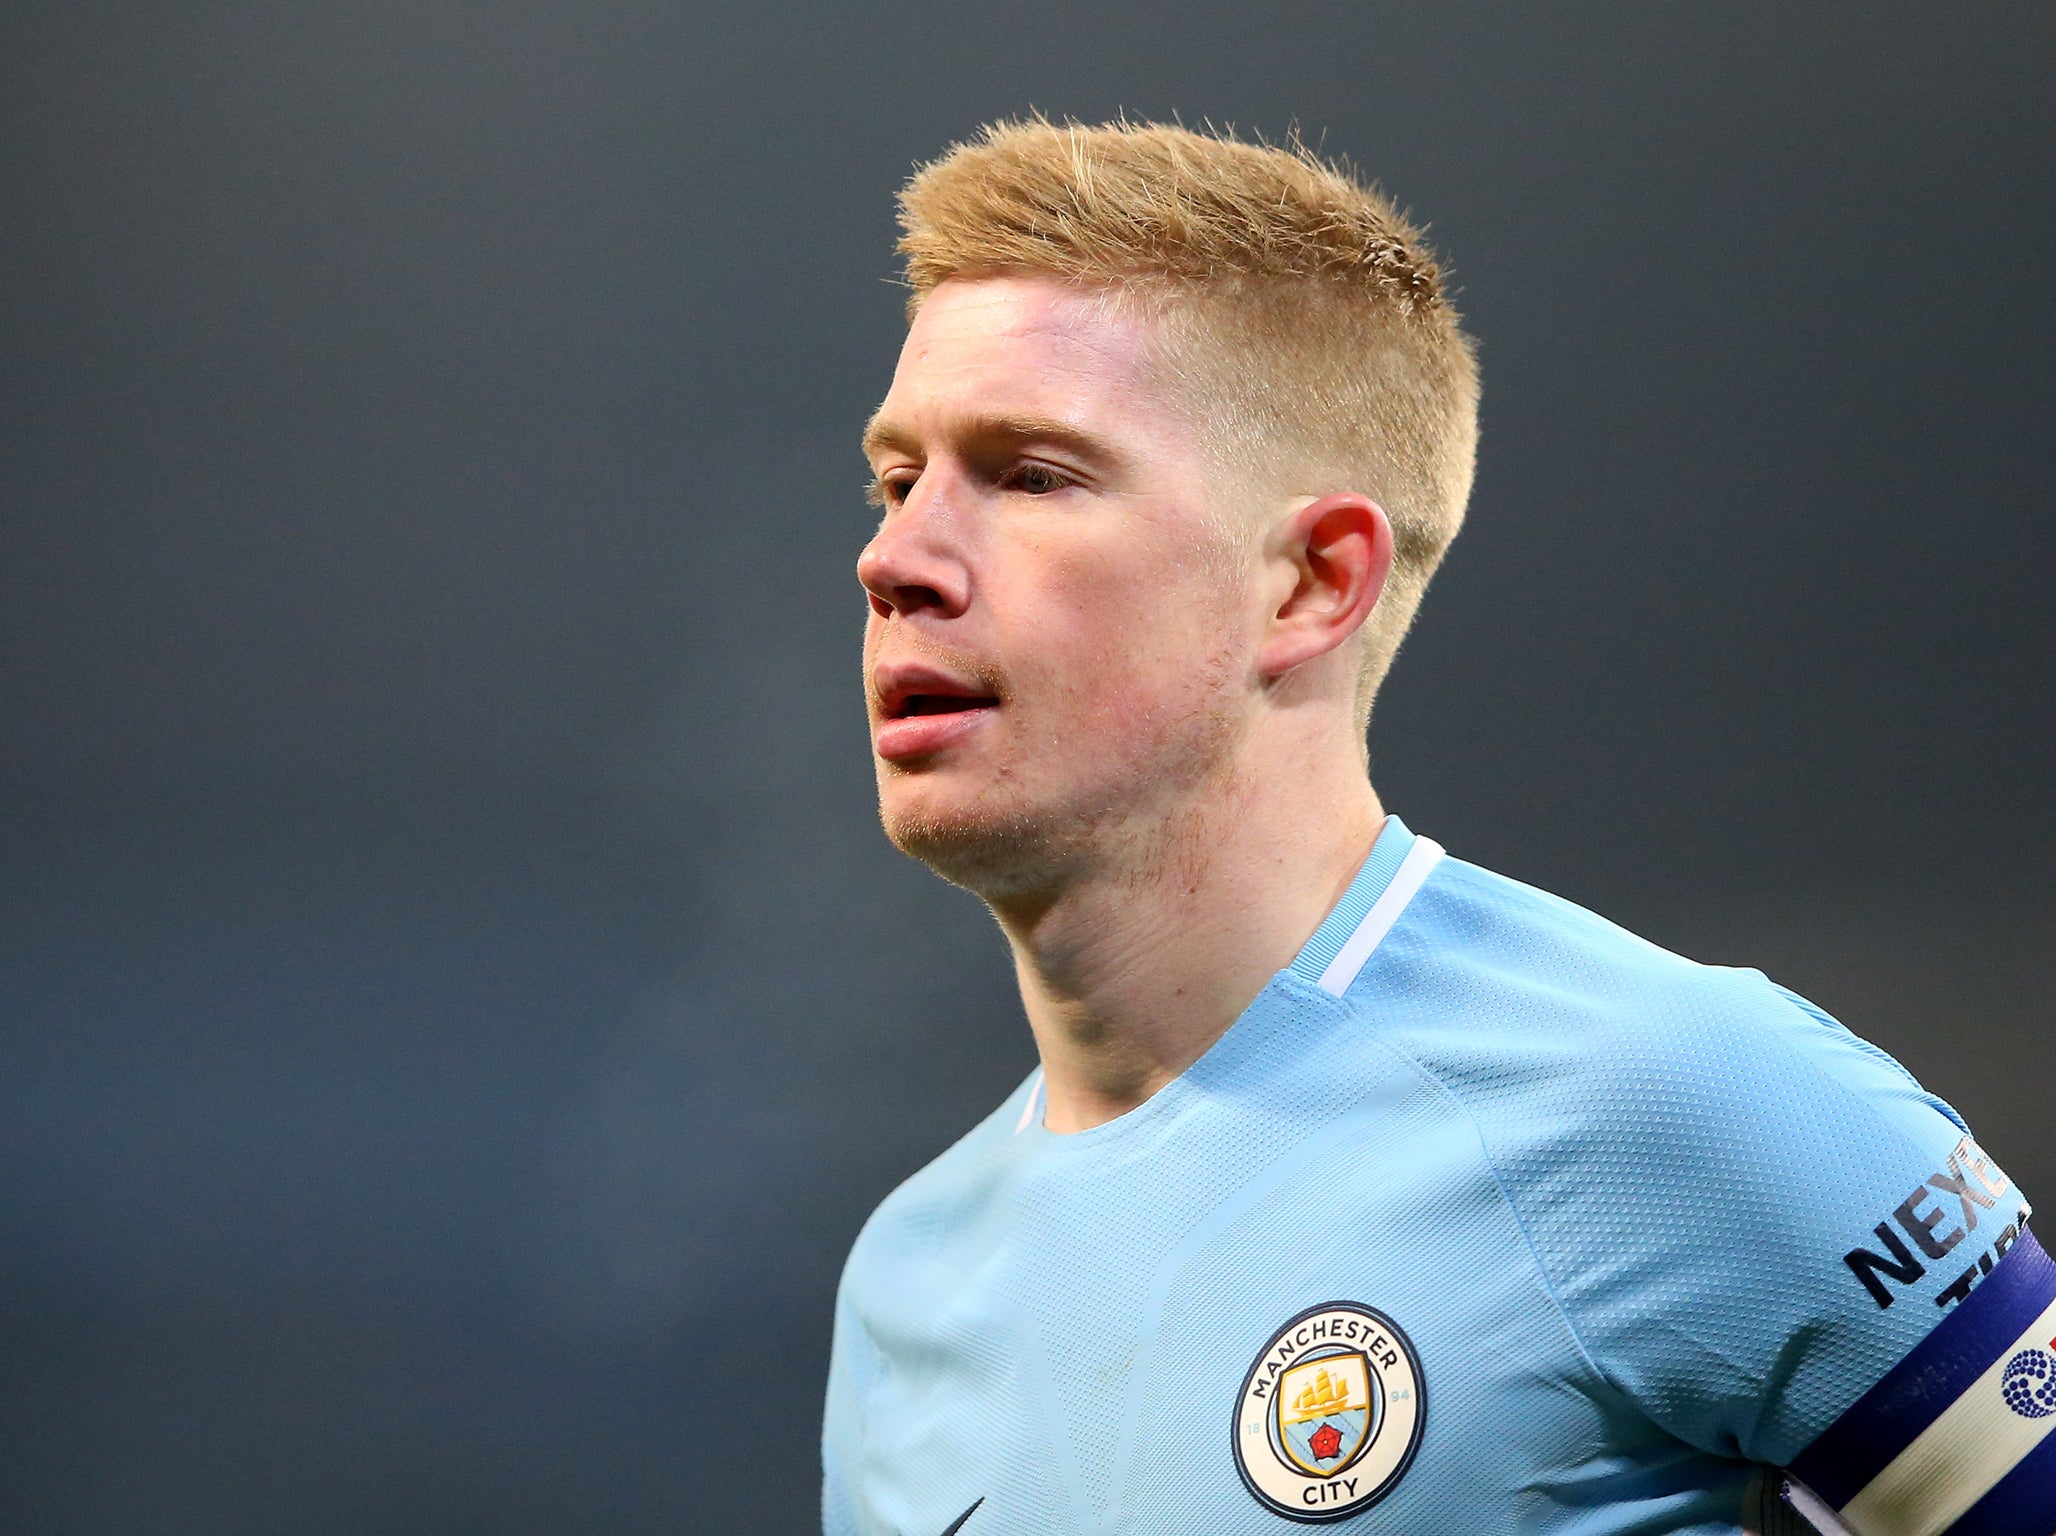 Manchester City&apos;s Kevin De Bruyne: Mohamed Salah and I have shown Jose Mourinho our strengths